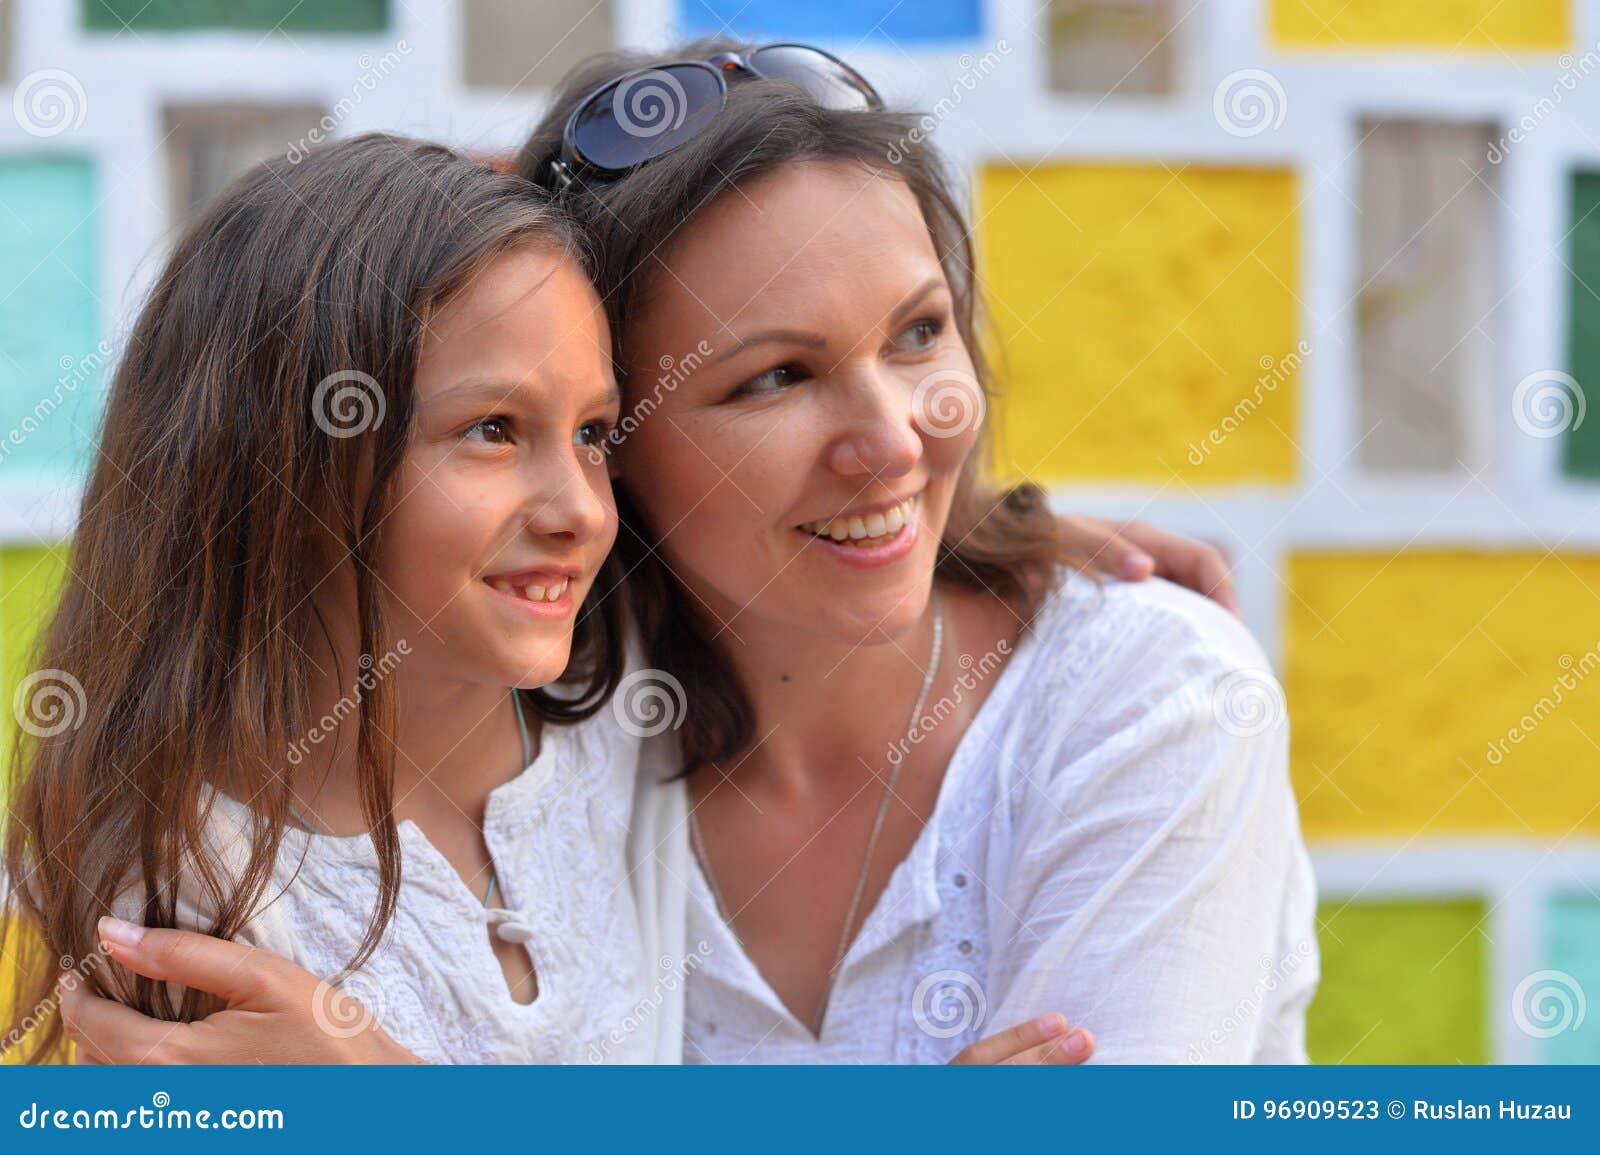 happy mother and daughter hugging